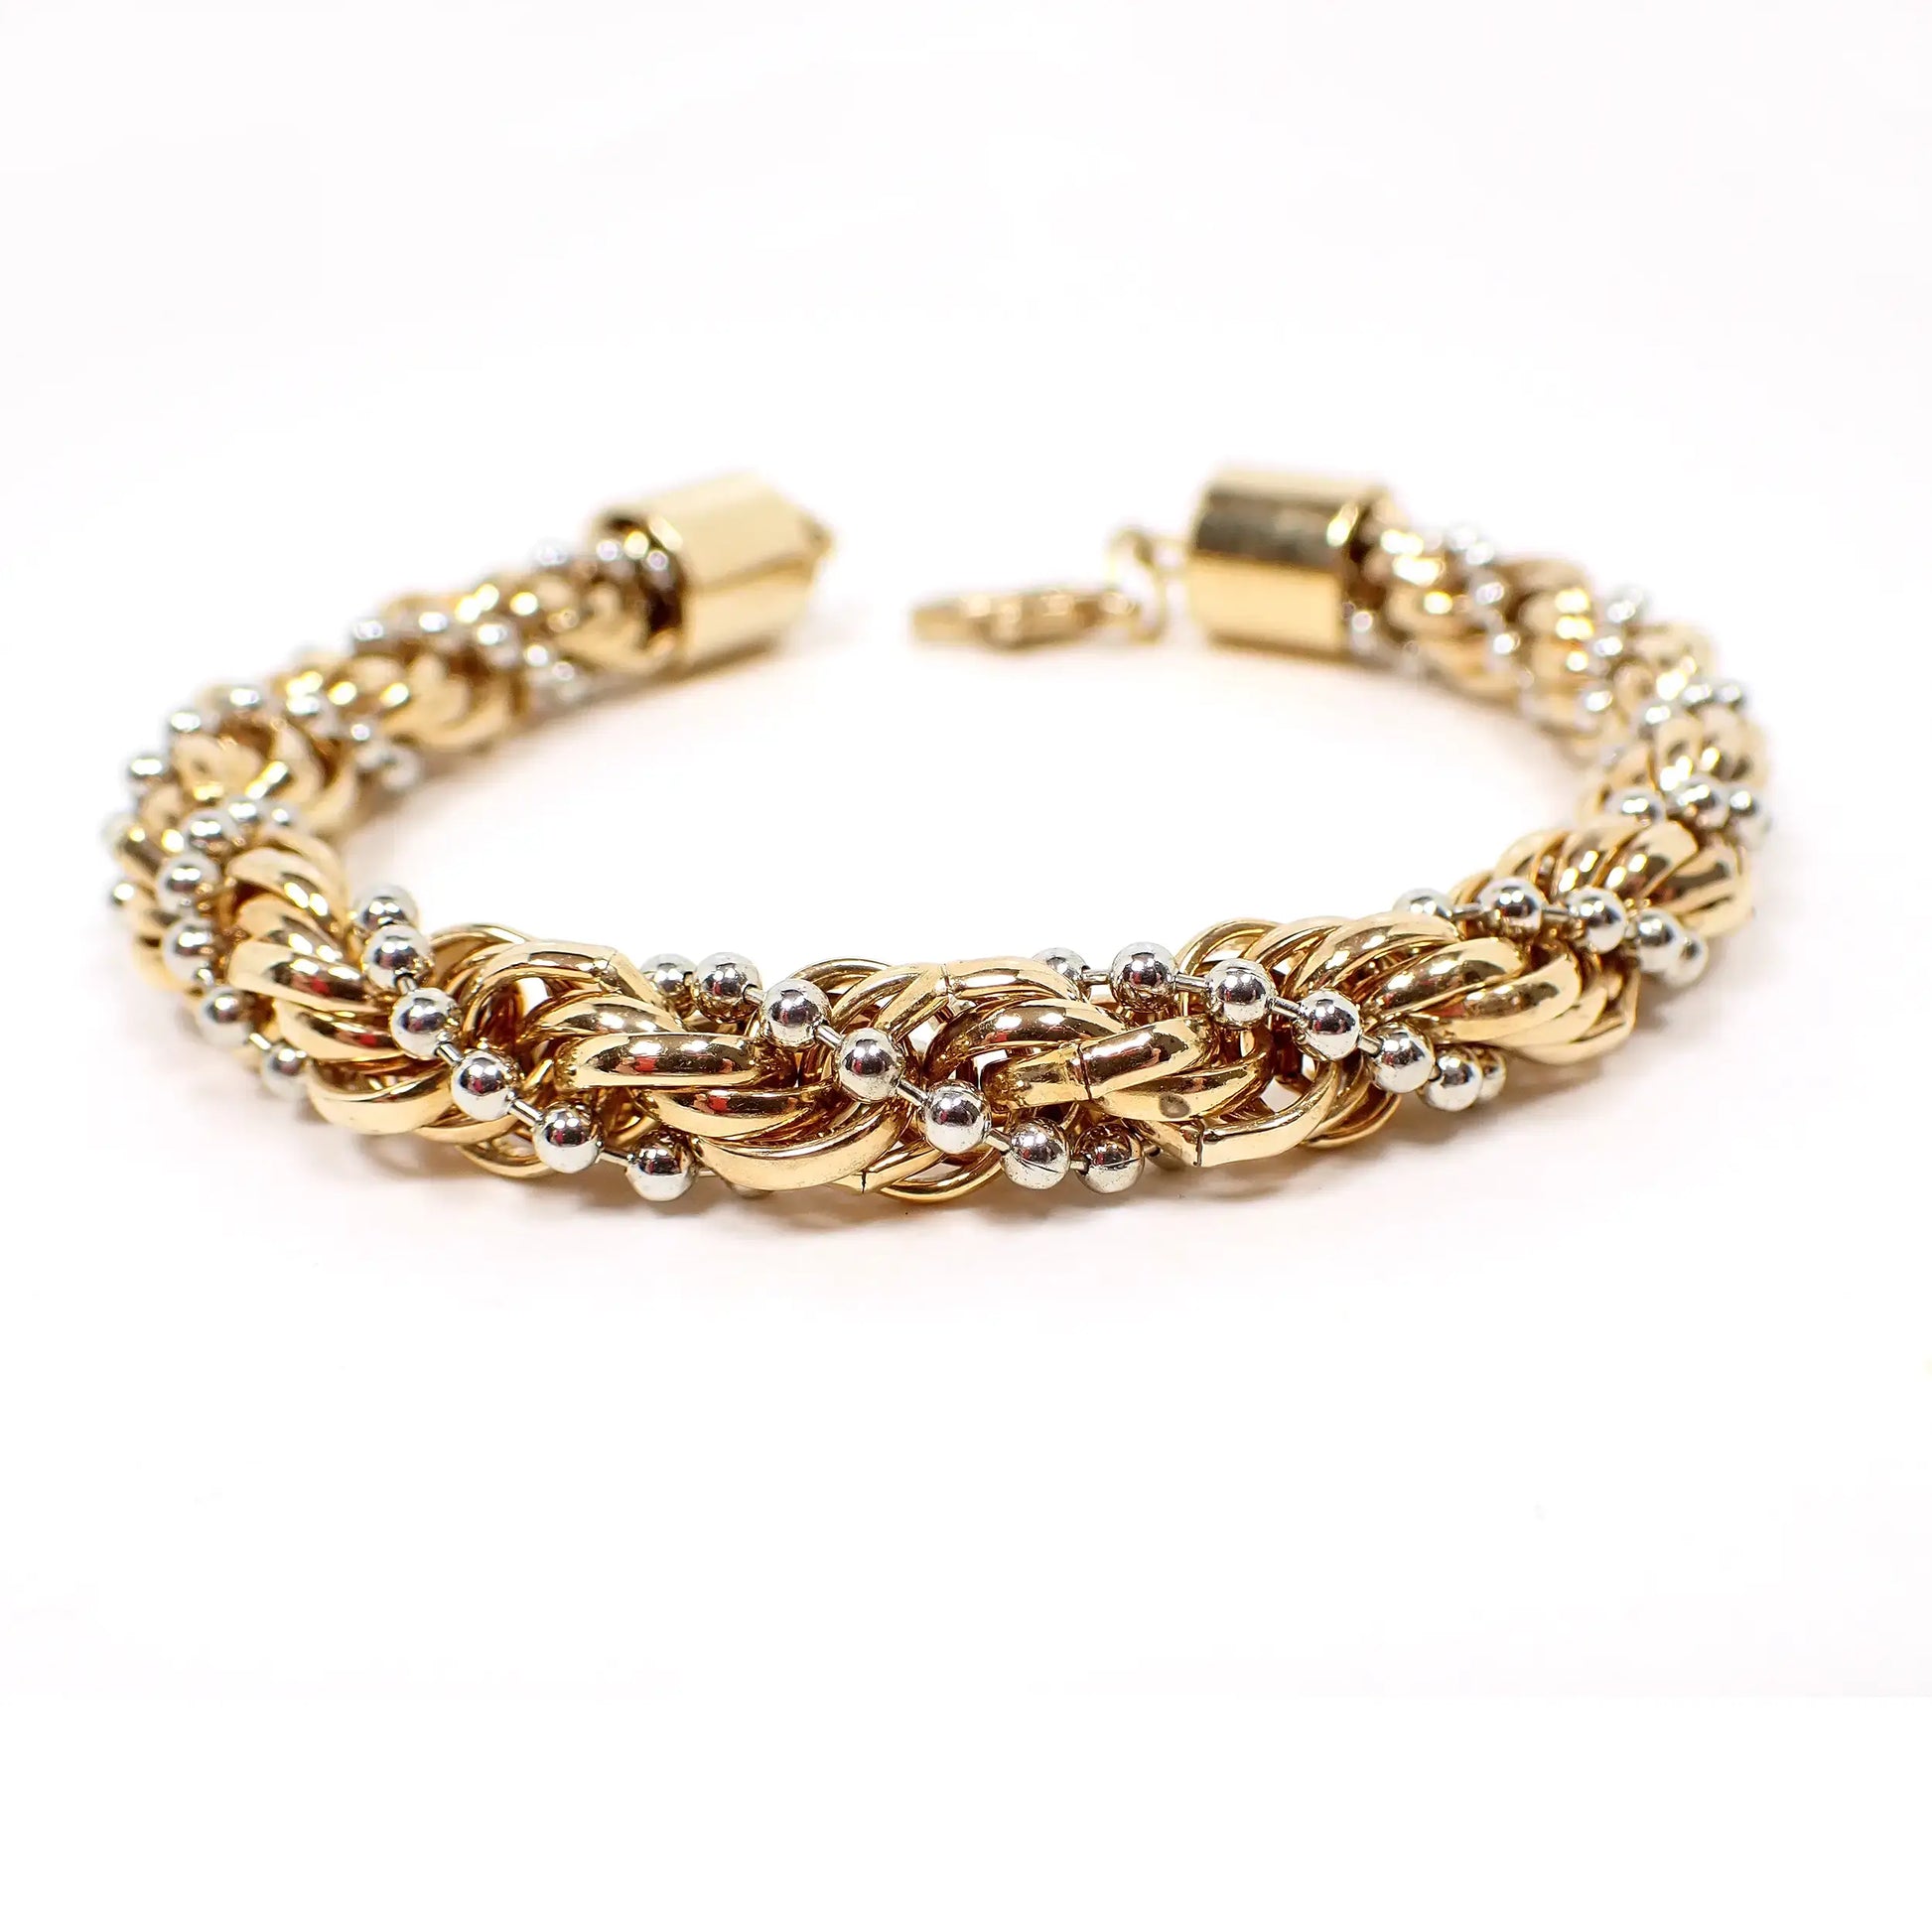 Enlarged view of the retro vintage twisted rope chain bracelet. The metal is mostly gold tone in color, including the lobster claw clasp at the end. It has a twisted rope design with a thin ball chain twisted in that's silver tone in color for a two tone look.